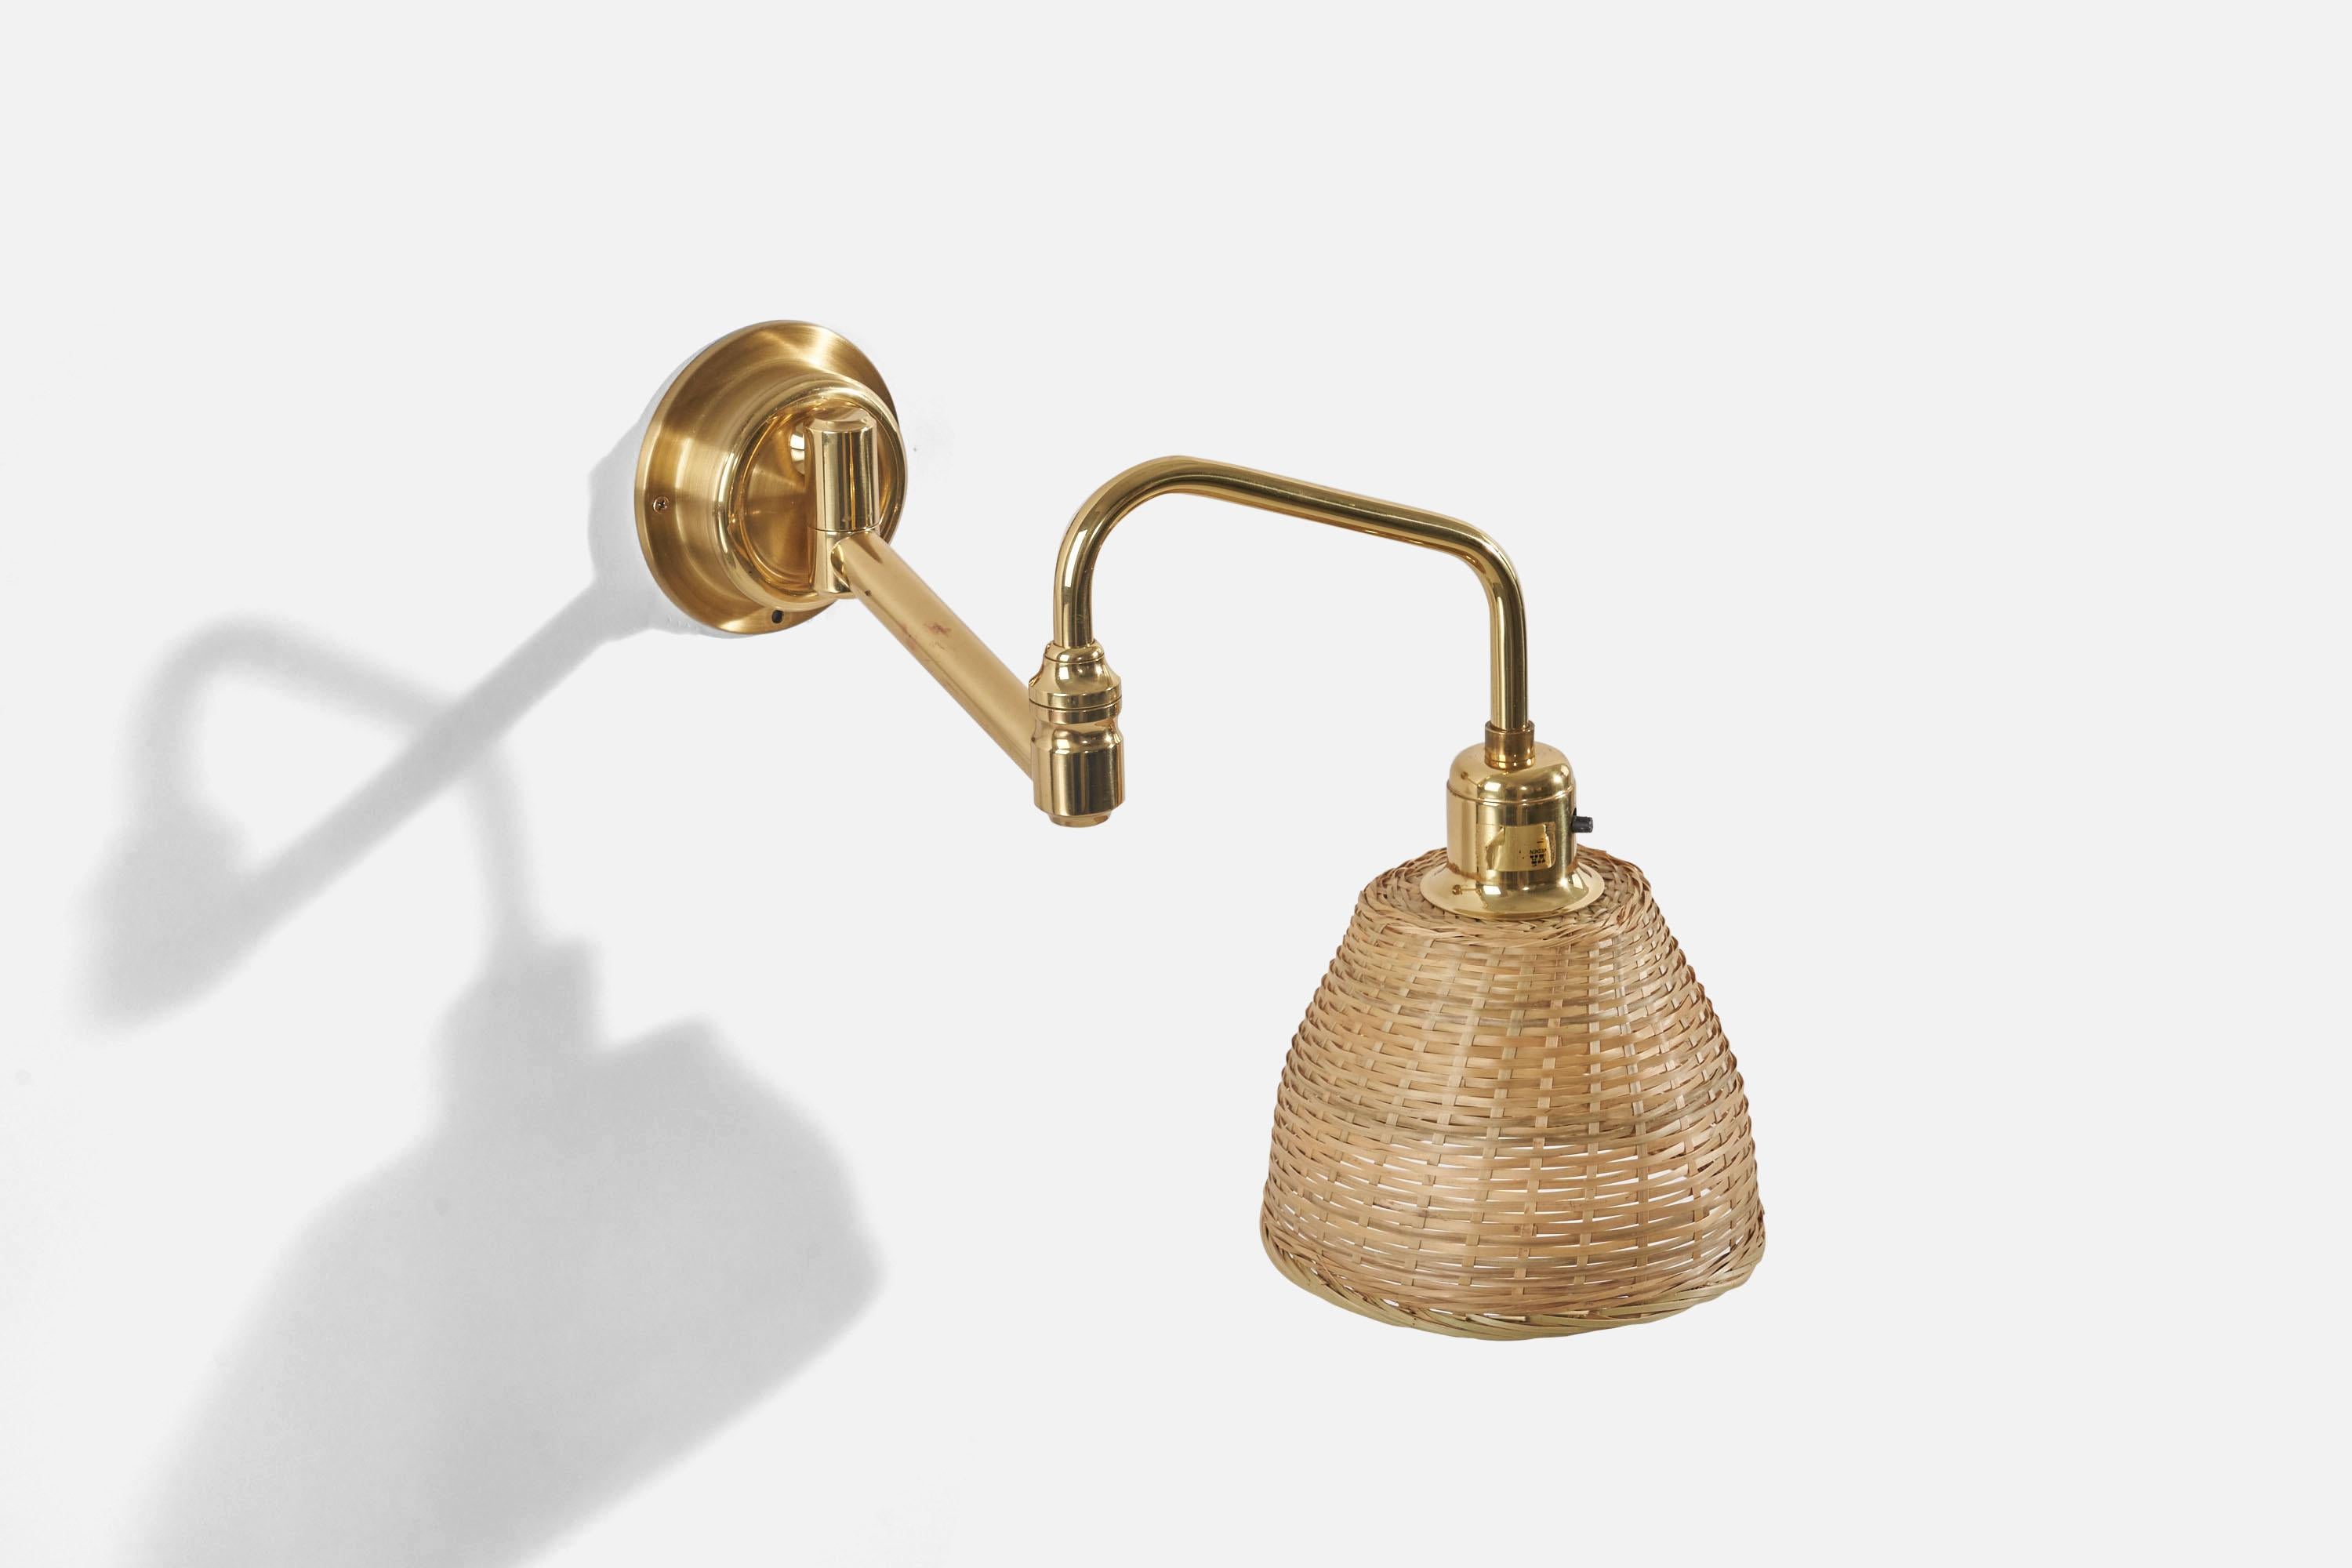 A brass and rattan wall light designed by Eric Wärnå and produced by EWÅ Wärnamo, Sweden, c. 1960s. With makers label.

Sold with Lampshade(s). Dimensions stated are of Sconce with Shade(s).

Dimensions variable, measurements listed are at the